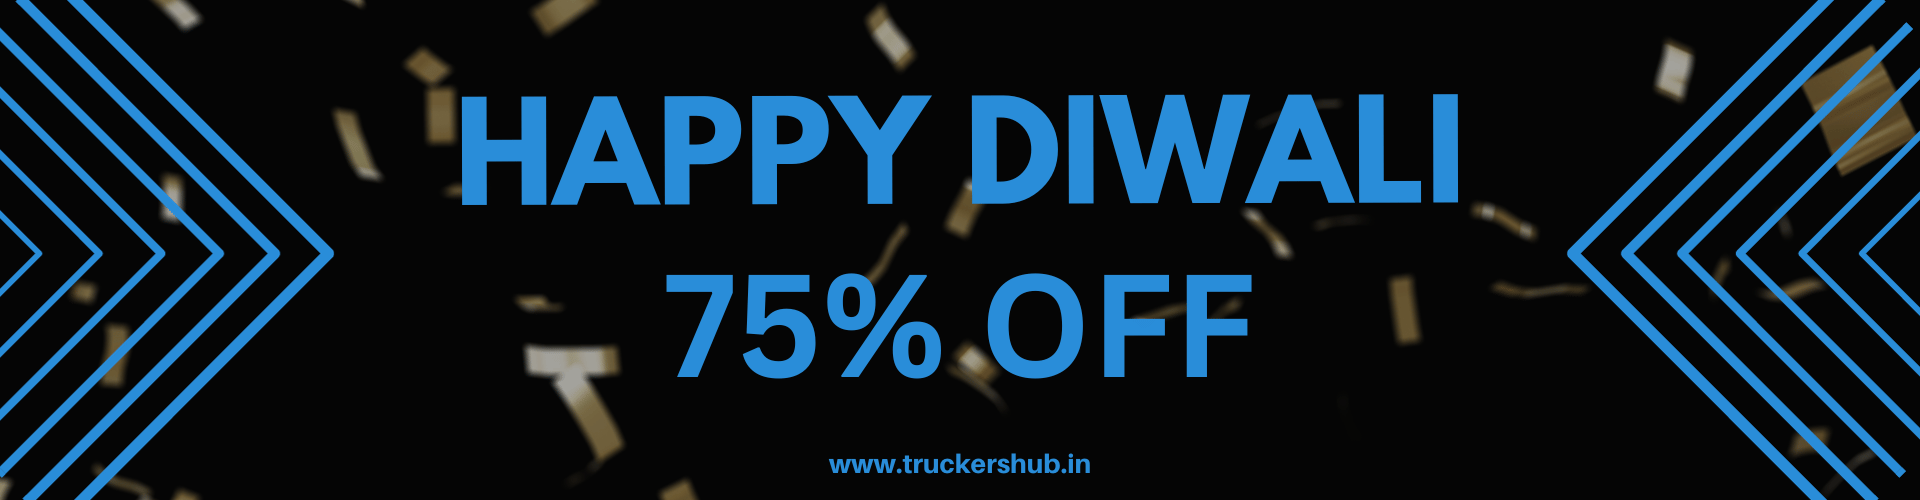 🎉 **TruckersHub Diwali Sale Extravaganza! 🪔 Up to 75% Off on All VTC Boost Subscriptions!** 🚚